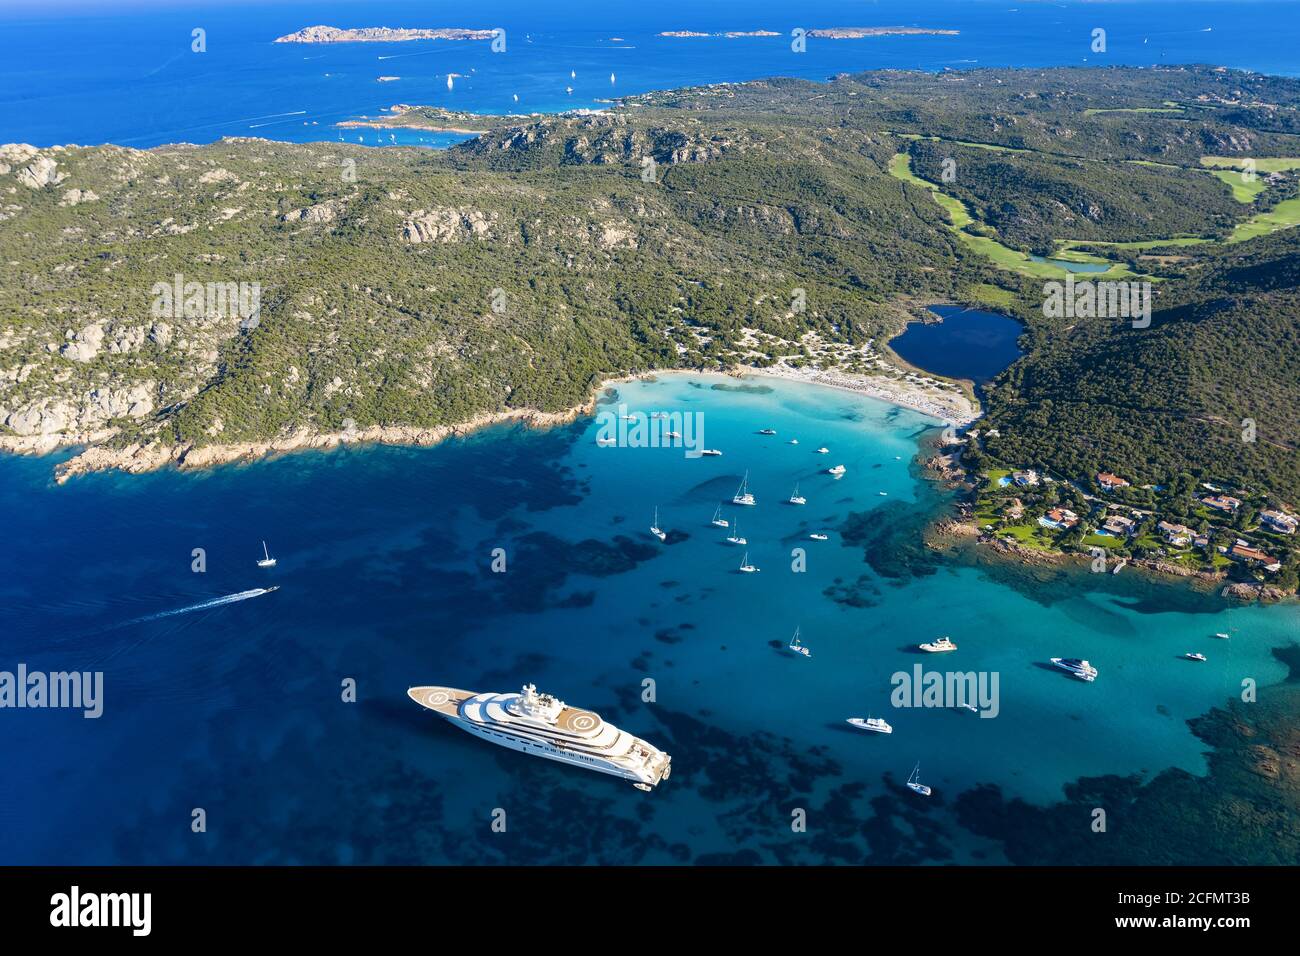 View from above, stunning aerial view of the Grande Pevero beach with boats and luxury yachts sailing on a turquoise, clear water. Sardinia, Italy. Stock Photo